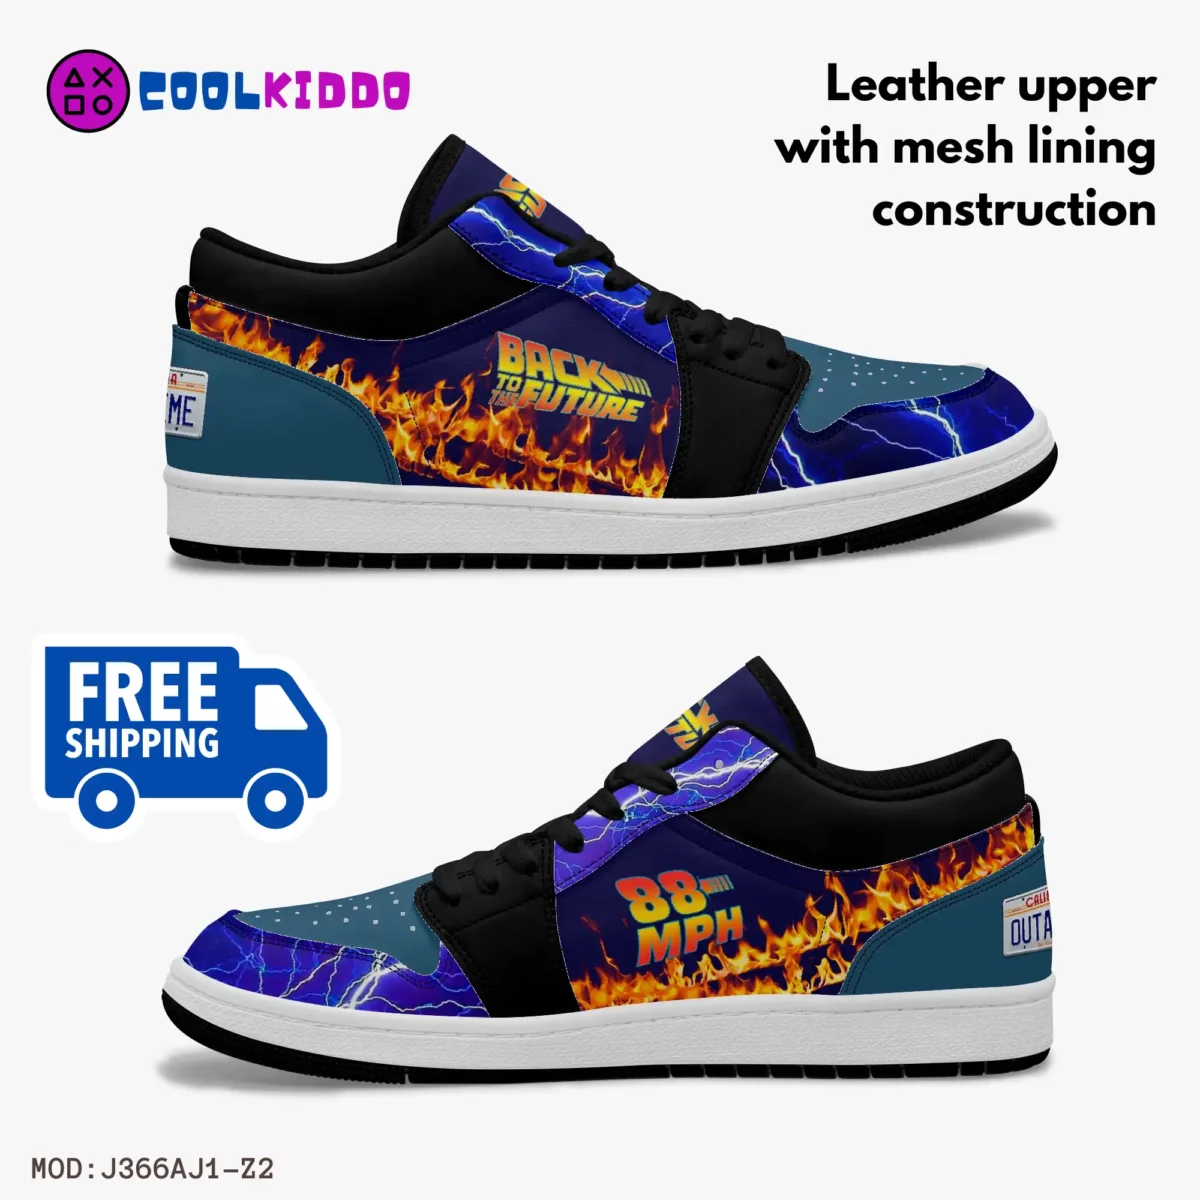 Back to the Future Movie Inspired Low-Top Leather Sneakers – Vintage Print Shoes for Youth/Adults Cool Kiddo 18